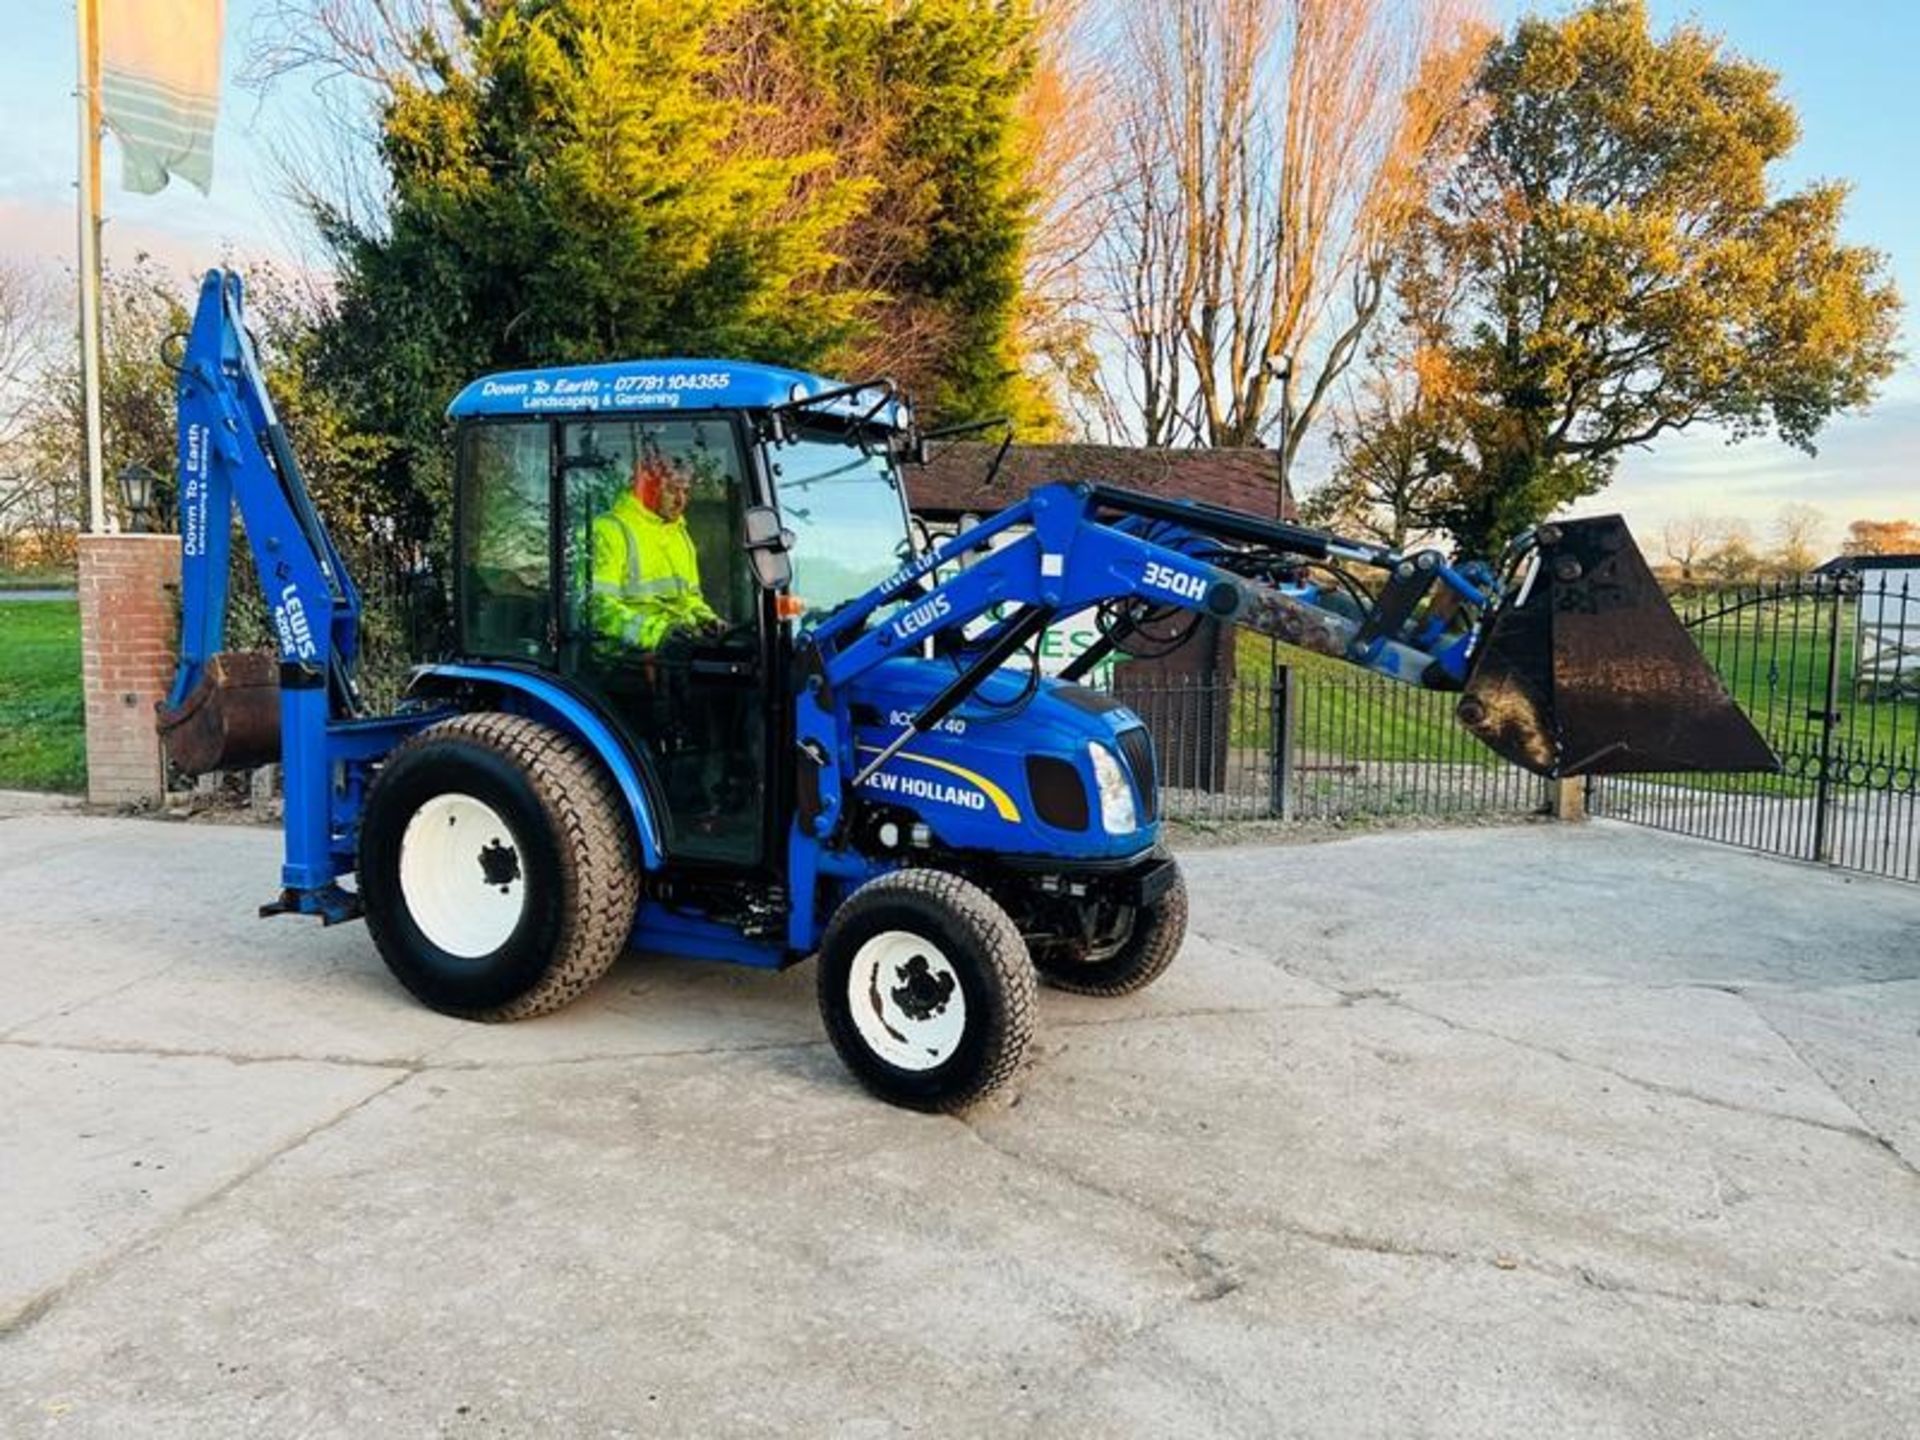 NEW HOLLAND BOOMER 40 4WD TRACTOR *YEAR 2014, ONLY 737 HRS* C/W LOADER & BACK TACTOR - Image 14 of 19